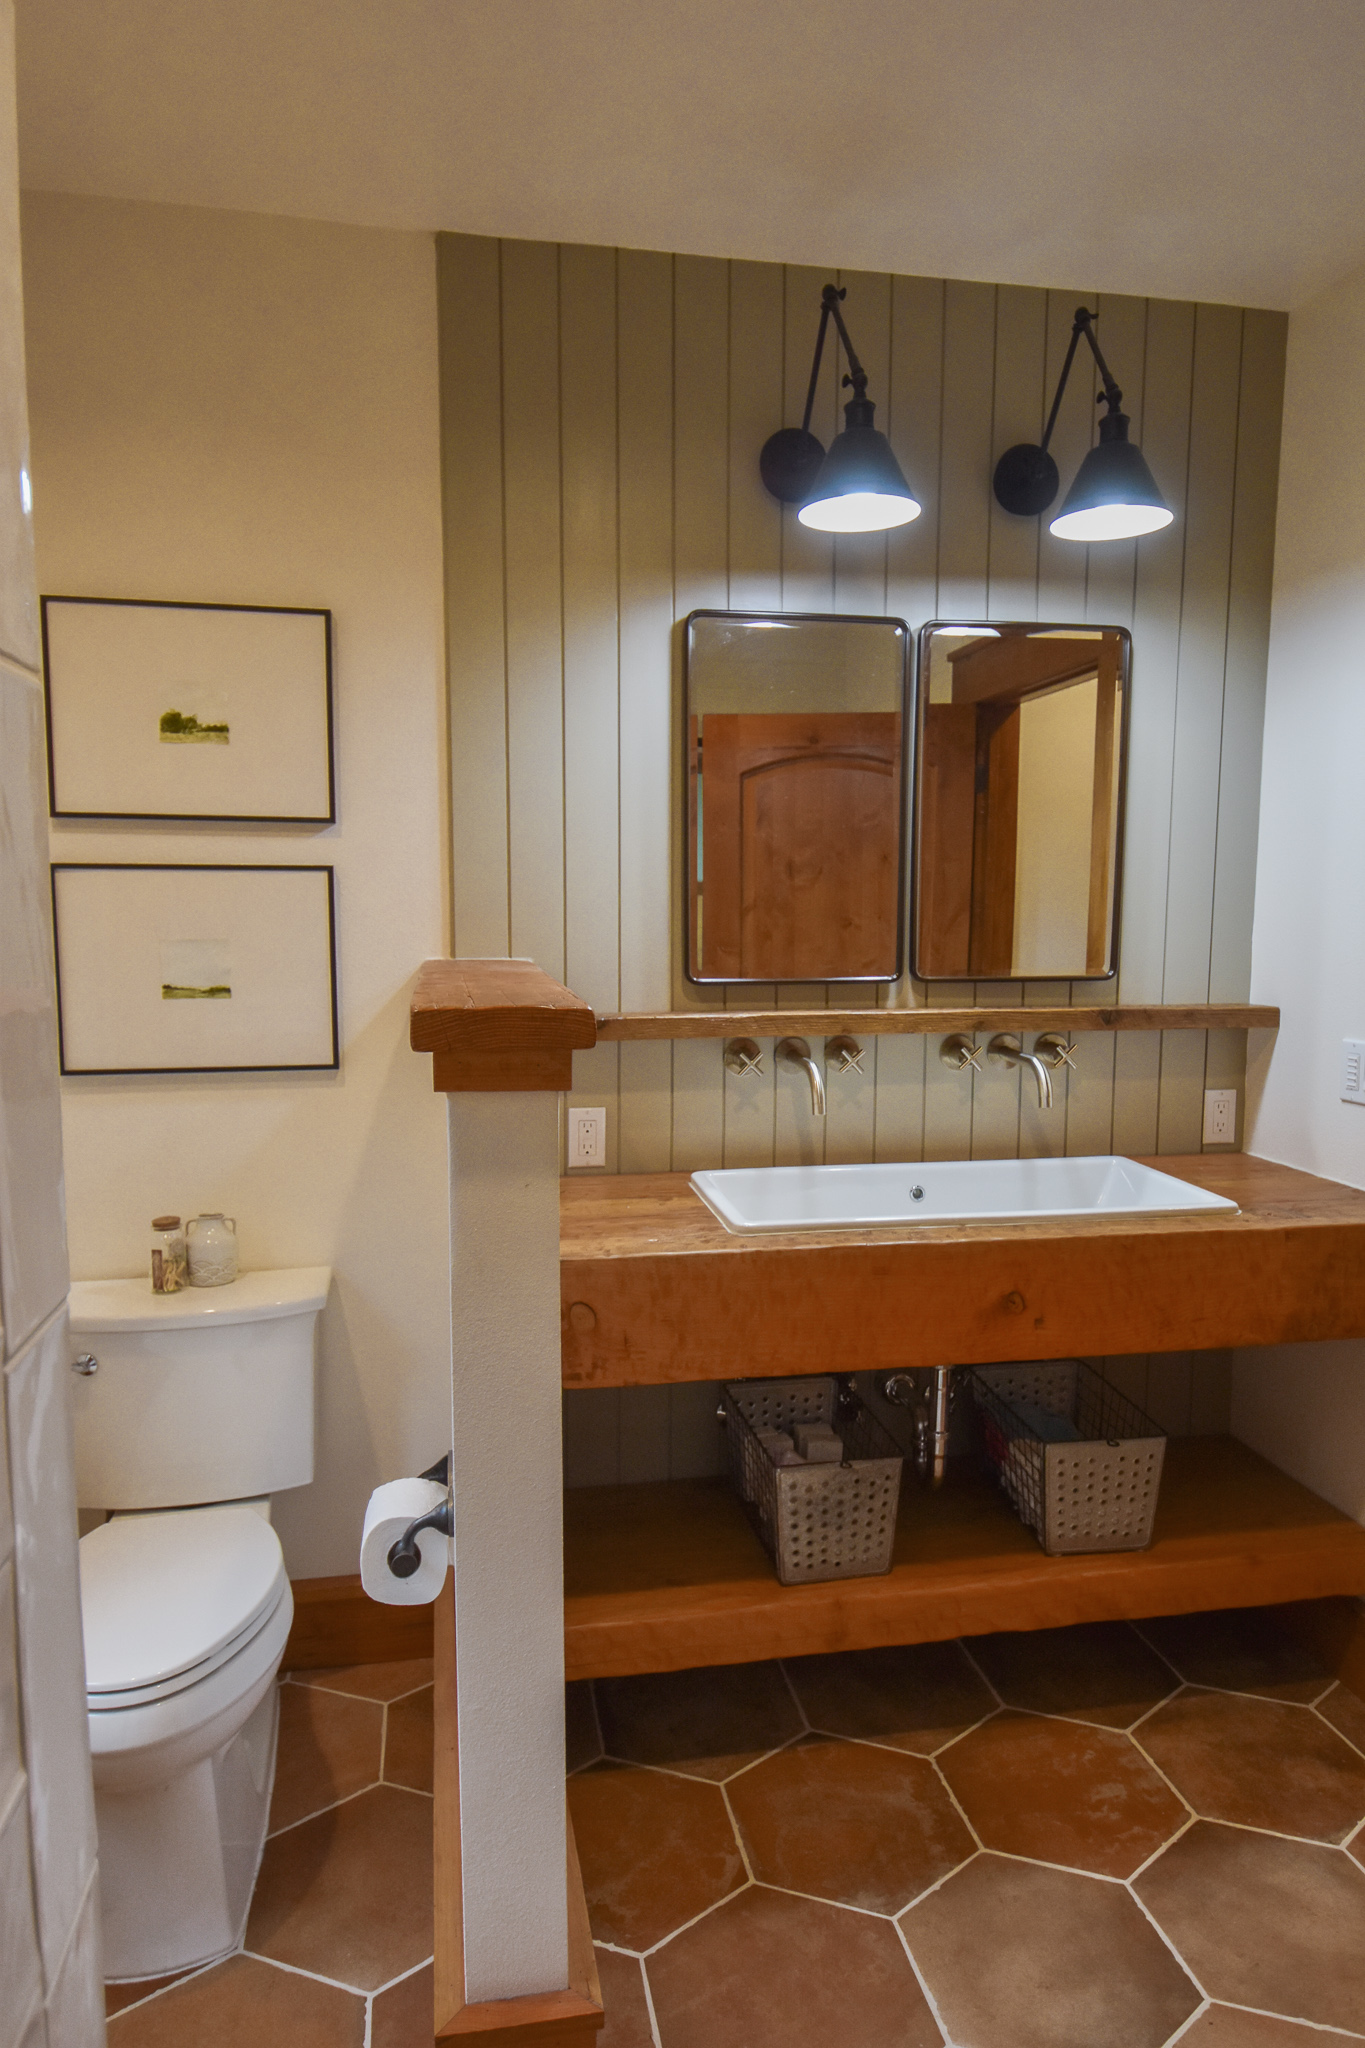 Before and after transformation of a bathroom: witness the incredible change from outdated to modern, showcasing renovated fixtures and refreshed design